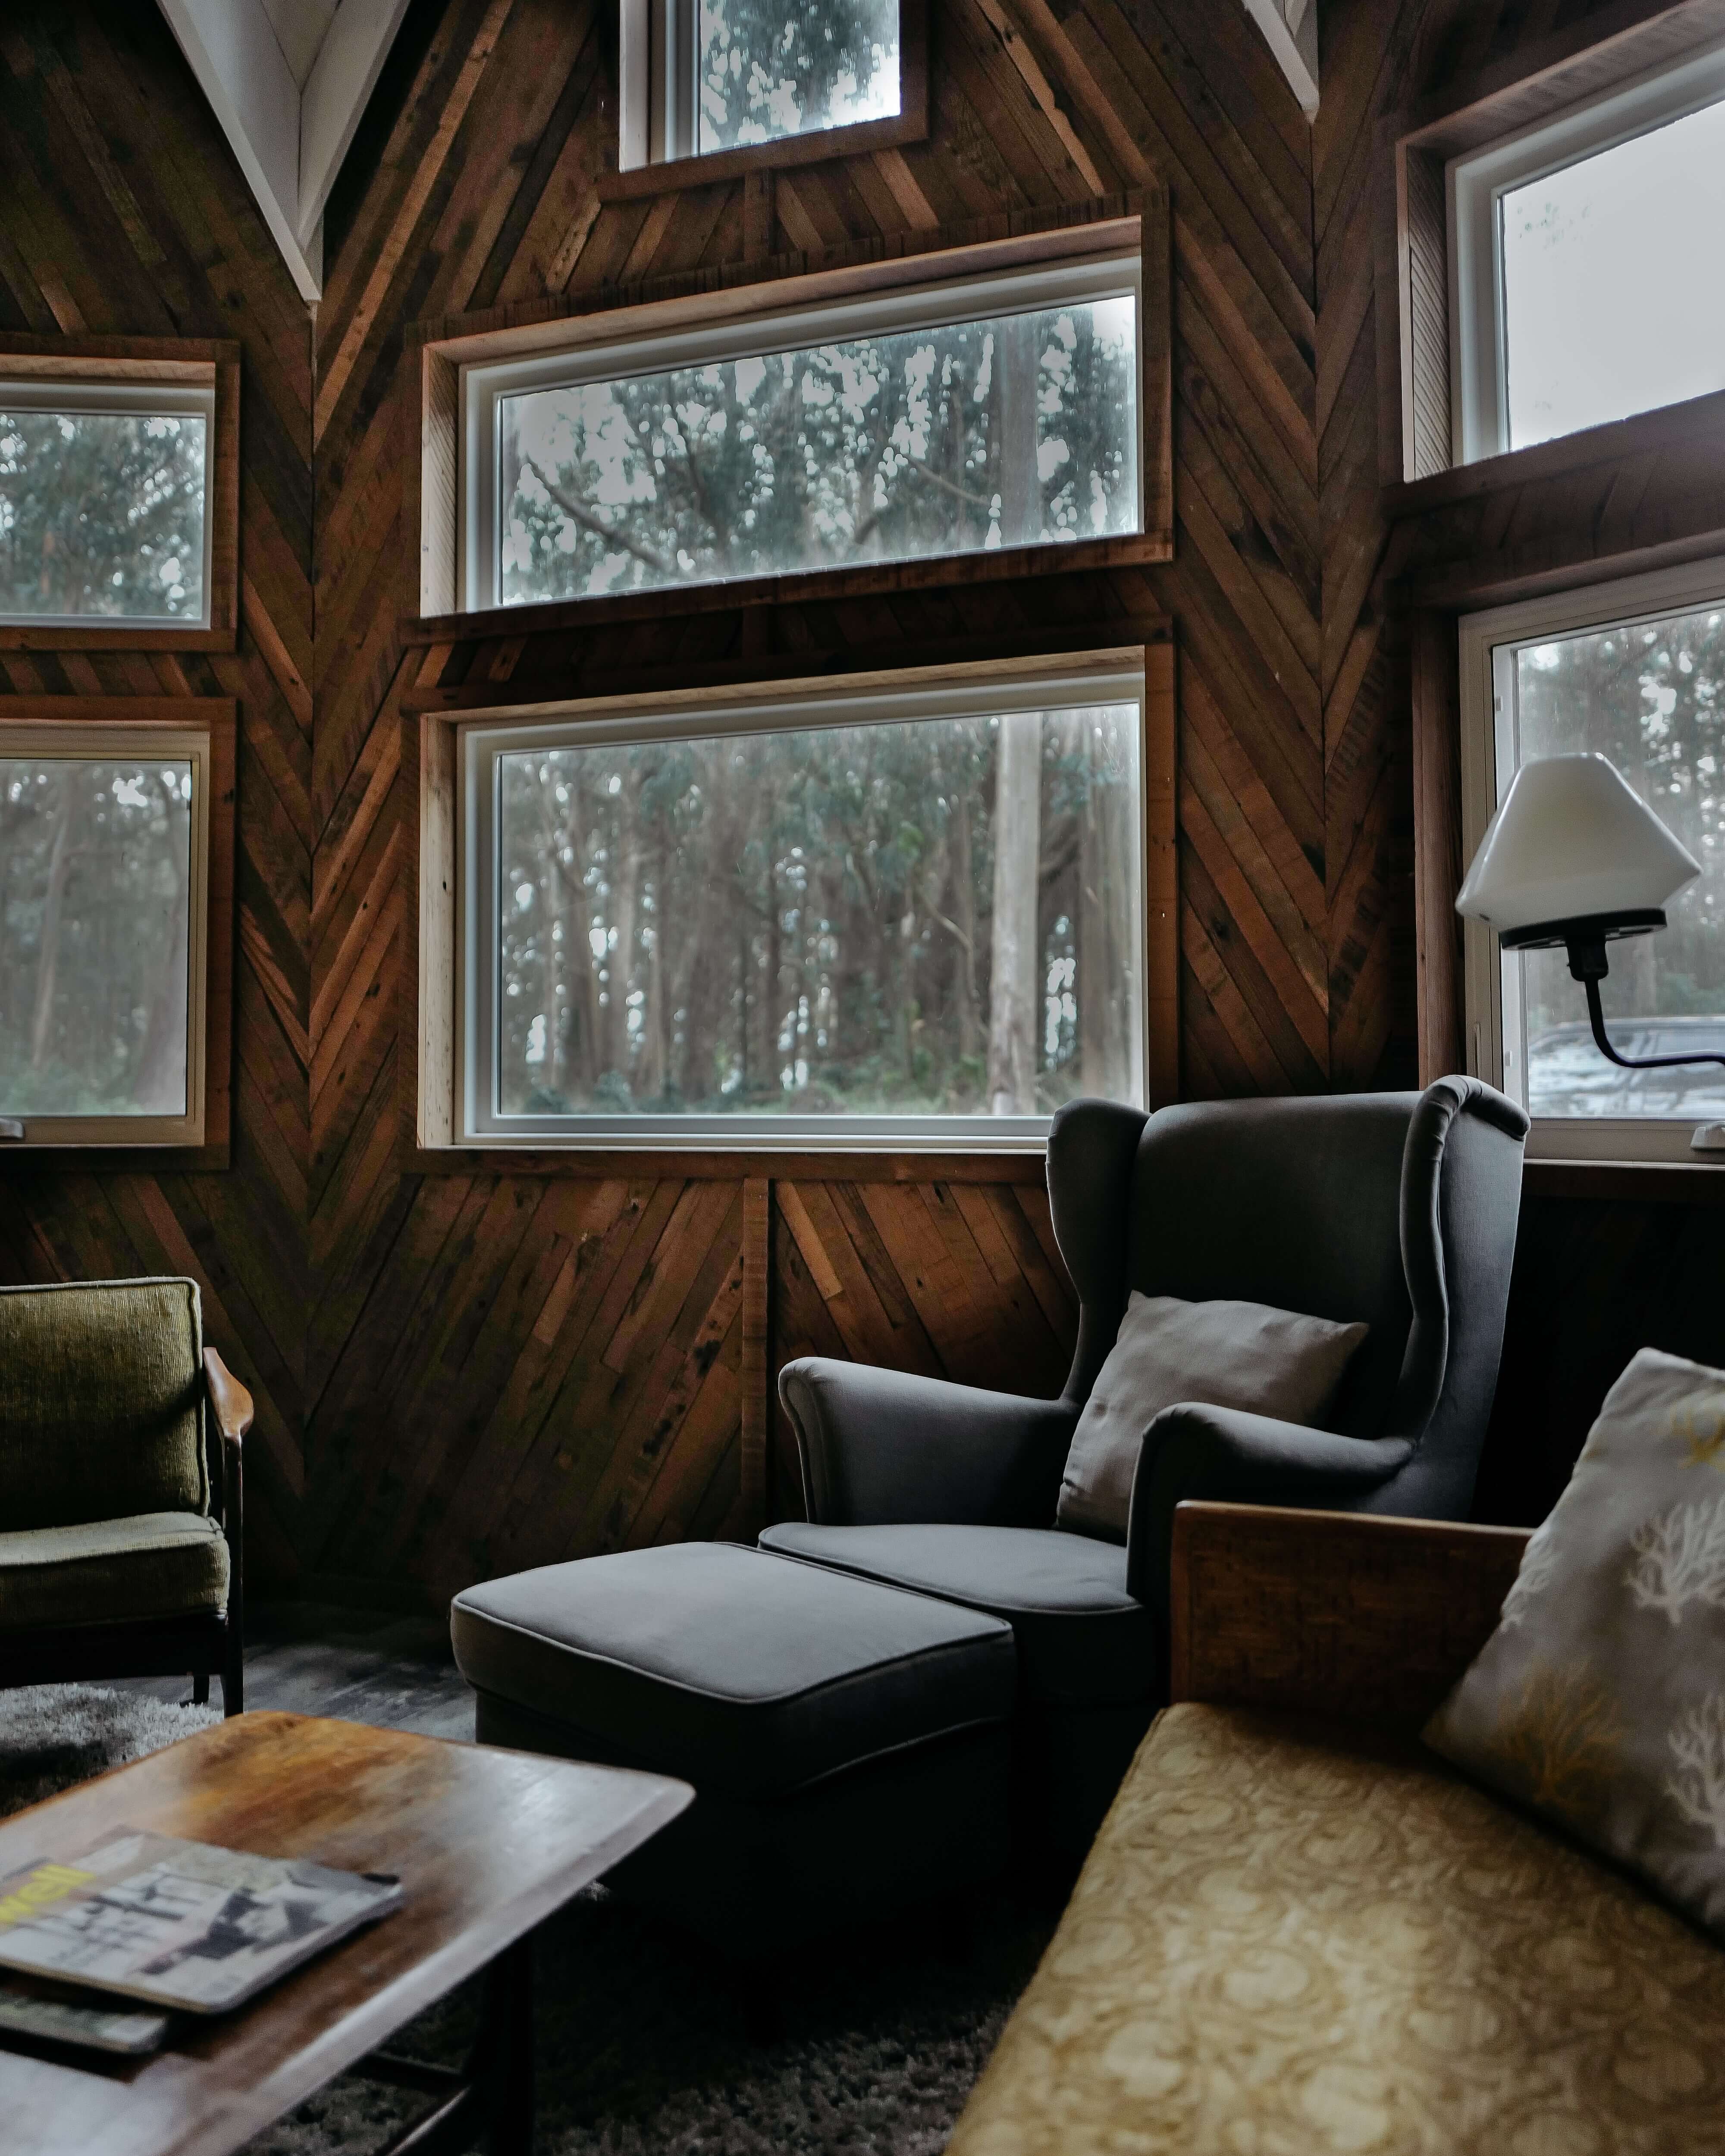 A cabin style living room with big windows and comfortable furniture